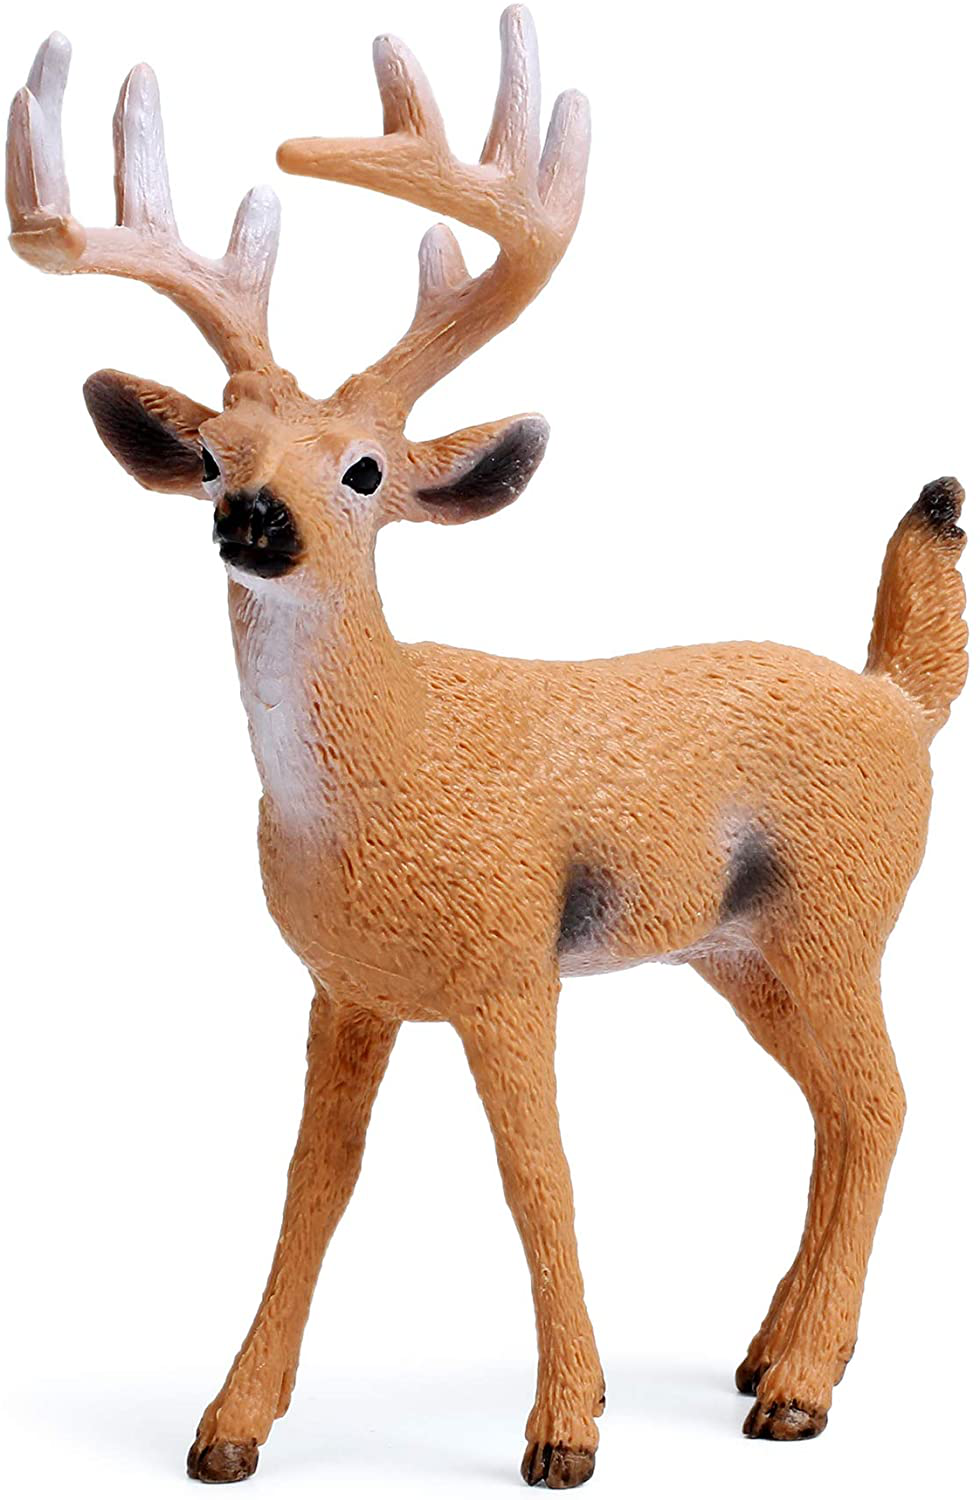 Forest Animals Figures, Woodland Creatures Figurines, Miniature Toys Cake Toppers (Deer Family, Fox, Rabbit, Squirrel)